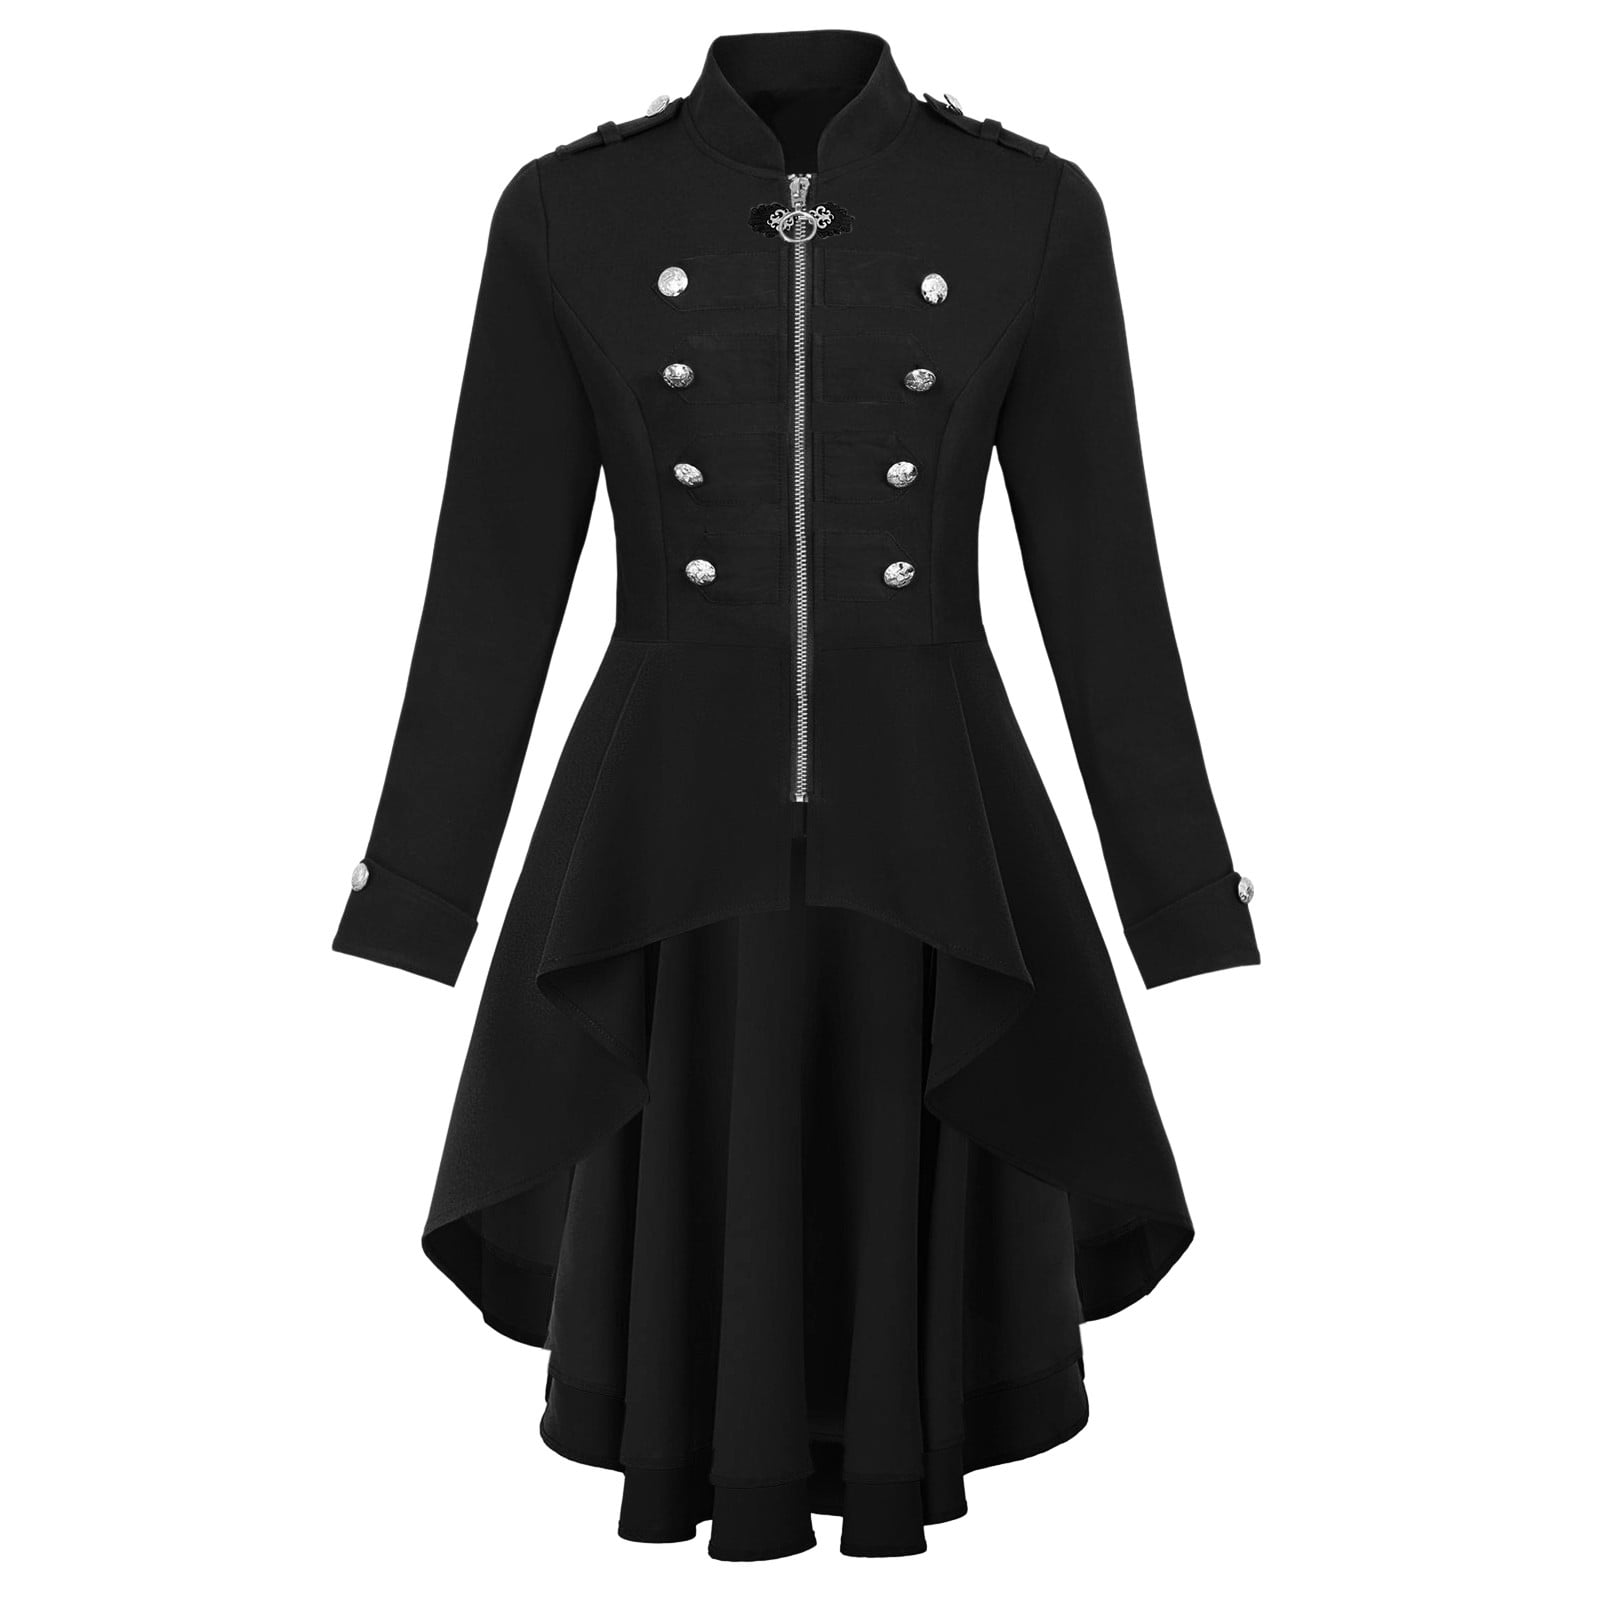 vbnergoie Womens Steampunk Jacket Tailcoat Military Blazer Buttons  Decorated Flowy Black Vest Outdoor plus Size Casual Jackets for Women for  Fall 